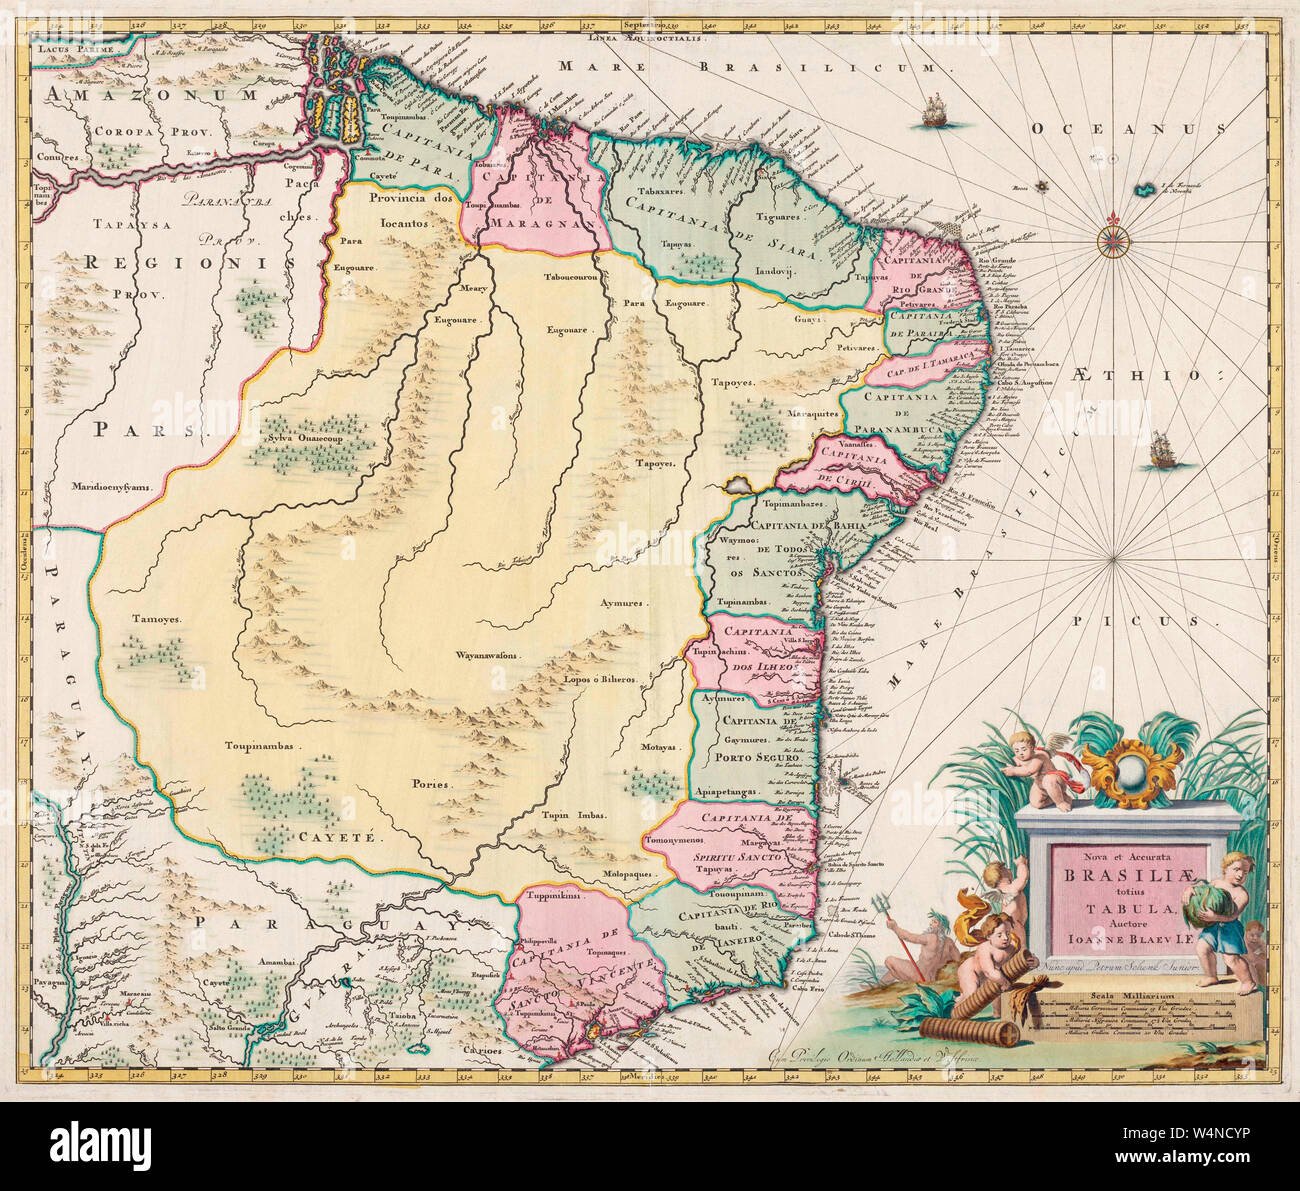 Map of Brazil, by Dutch cartographer Johannes Willemszoon Blaeu, published in Amsterdam 1662 by Pieter Schenk. Stock Photo